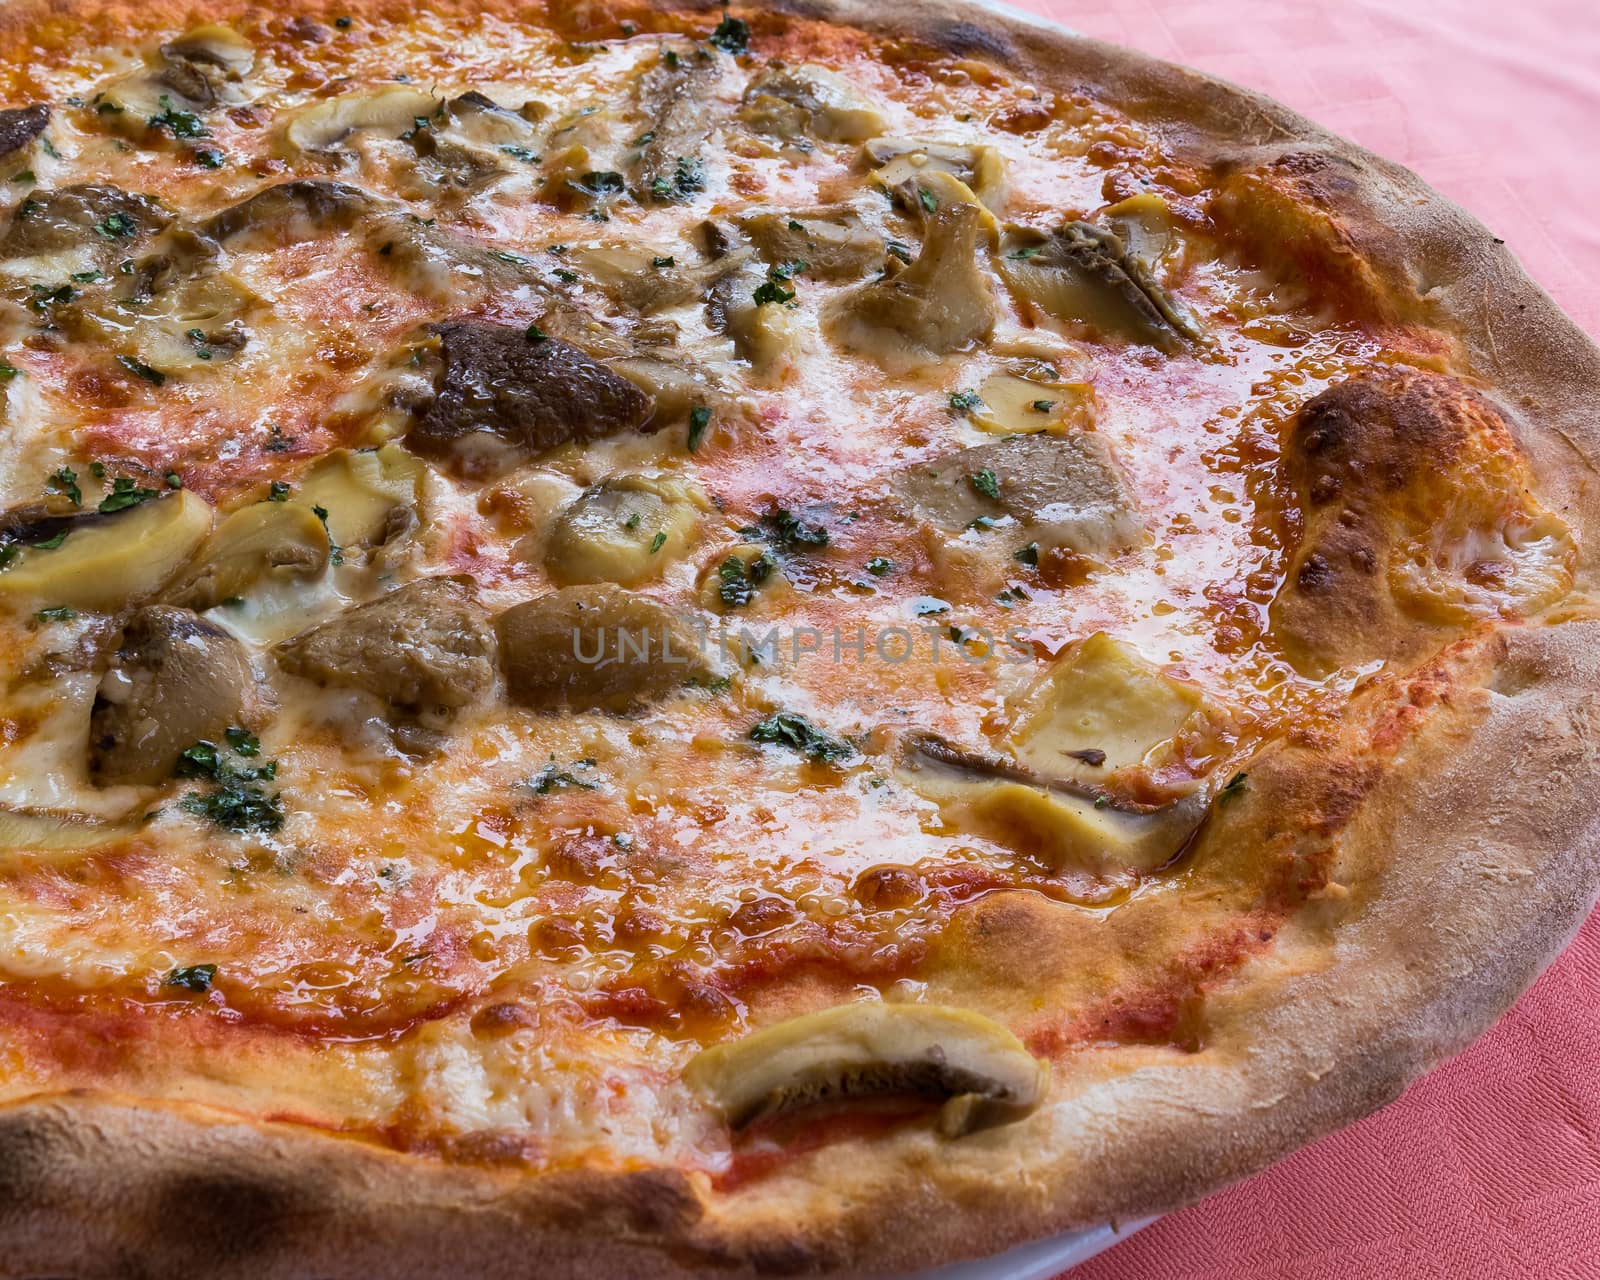 In the picture typical Italian pizza  with tomato,mozzarella,cheese and mushrooms.